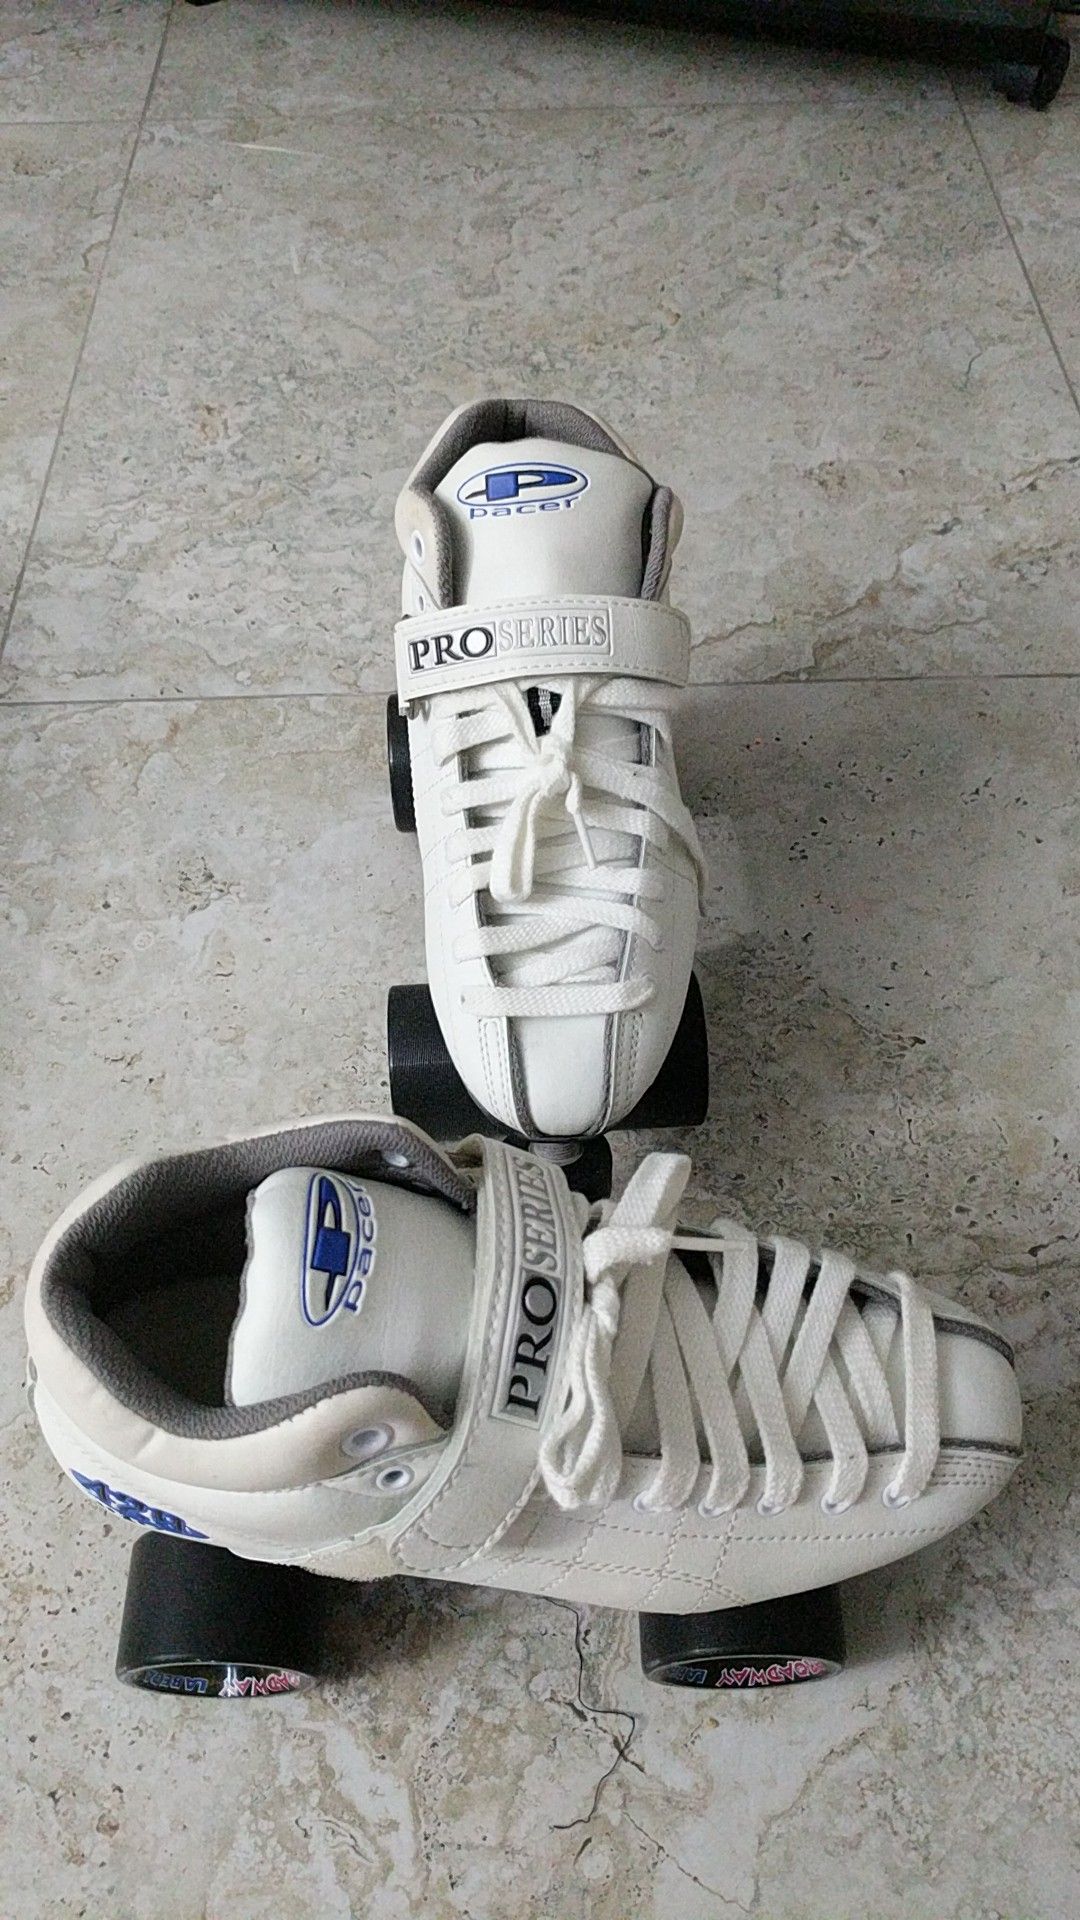 Roller Skates 429 Pro by Pacer Size 7